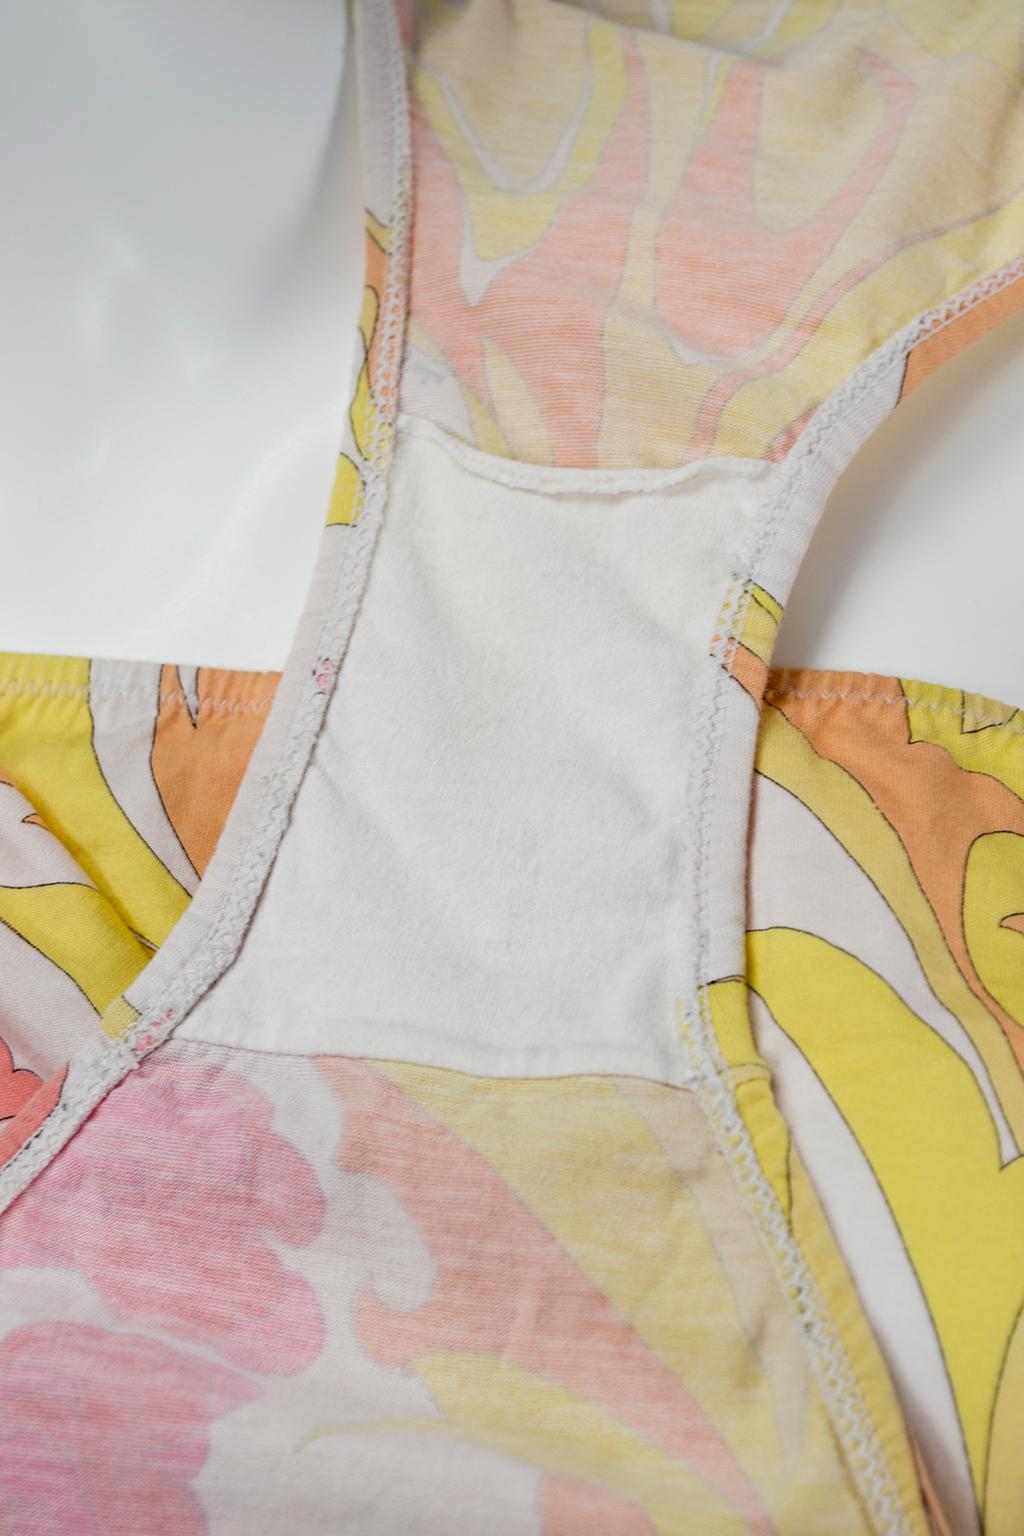 Emilio Pucci Pink Yellow Psychedelic Lounge Bra and Panty Set- S-M, 21st Century For Sale 2